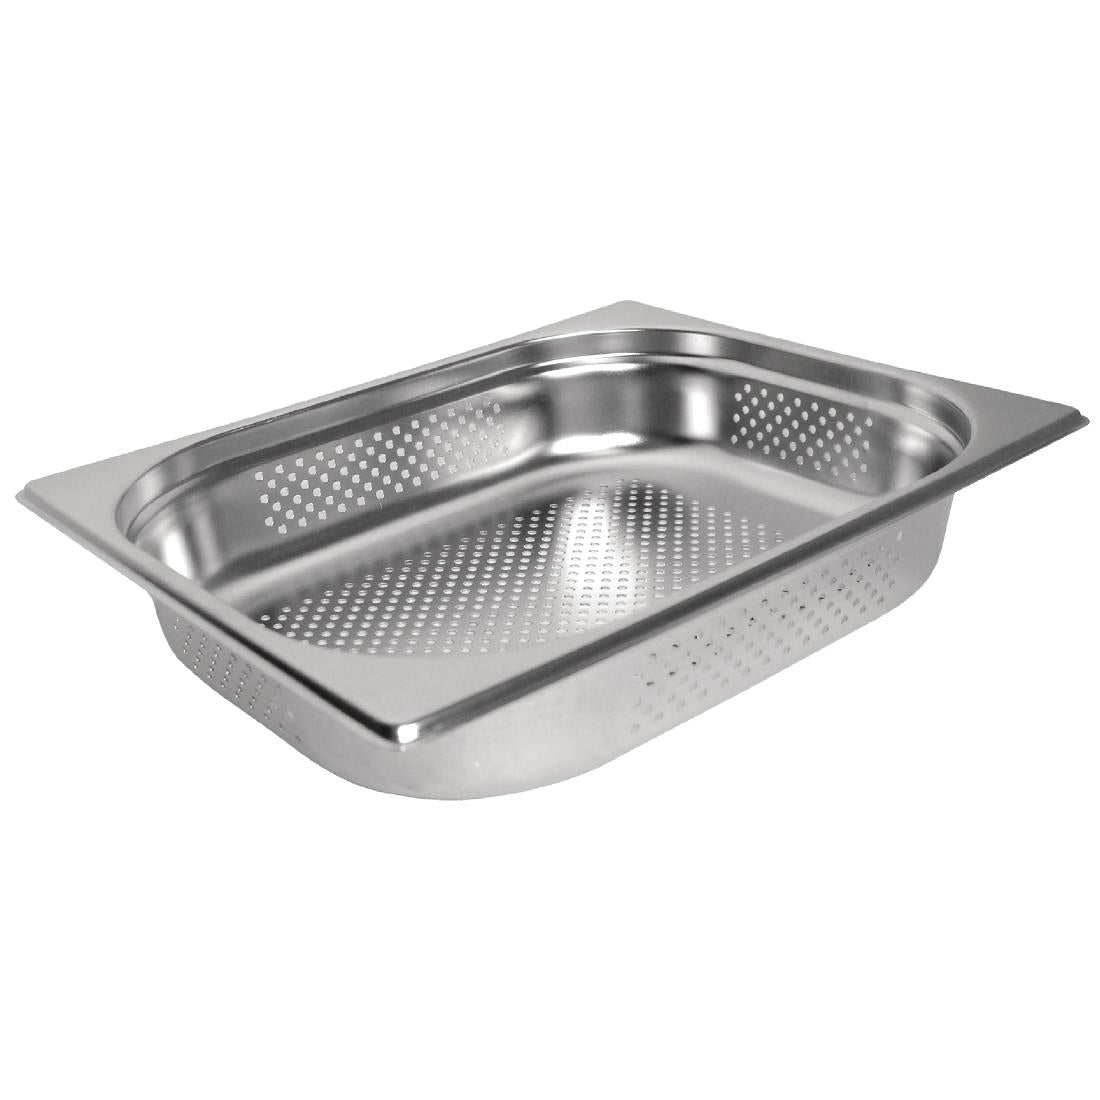 K844 Vogue Stainless Steel Perforated 1/2 Gastronorm Pan 65mm